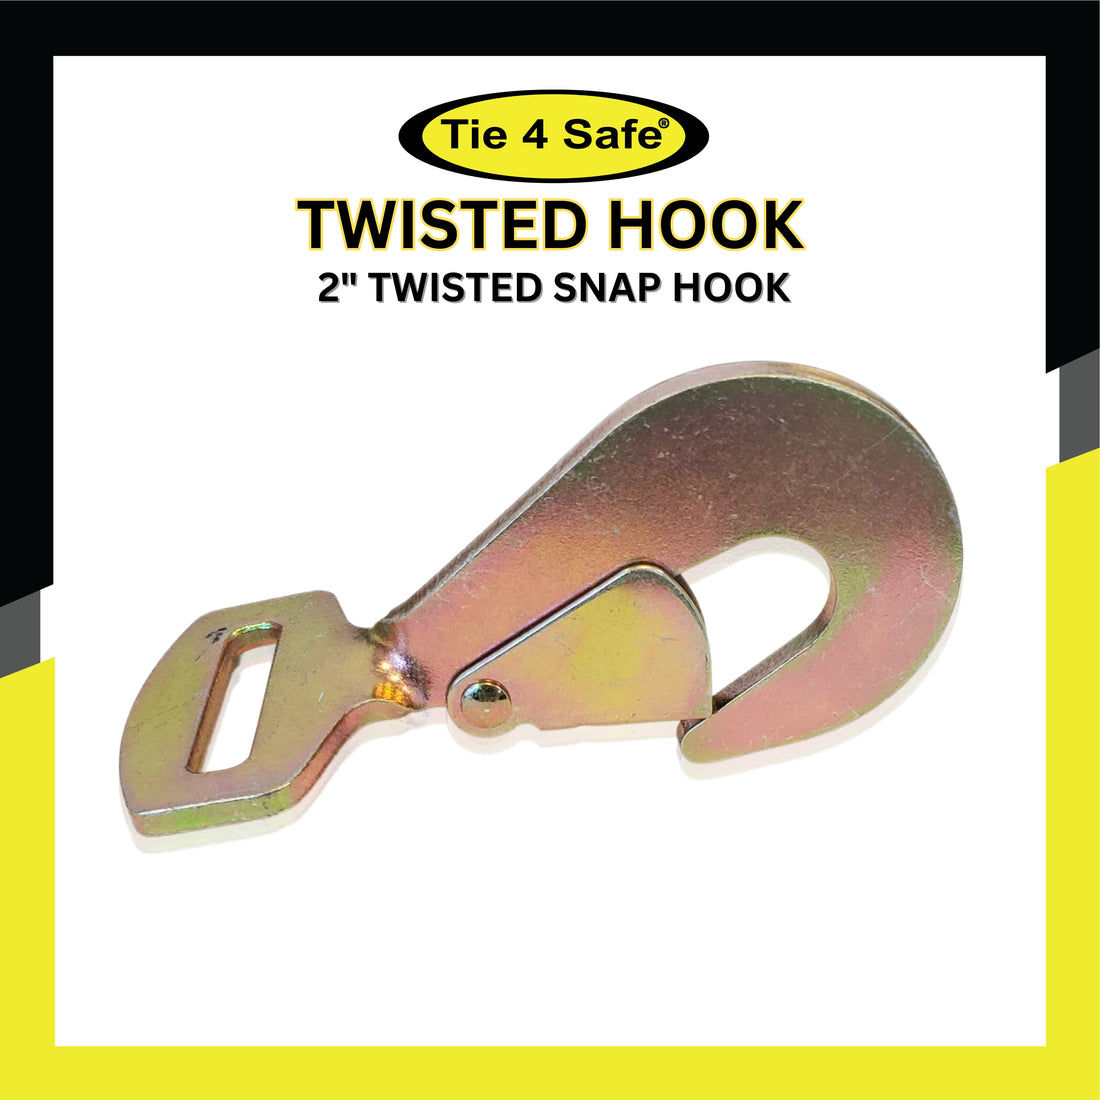 2" Twisted Snap Hook